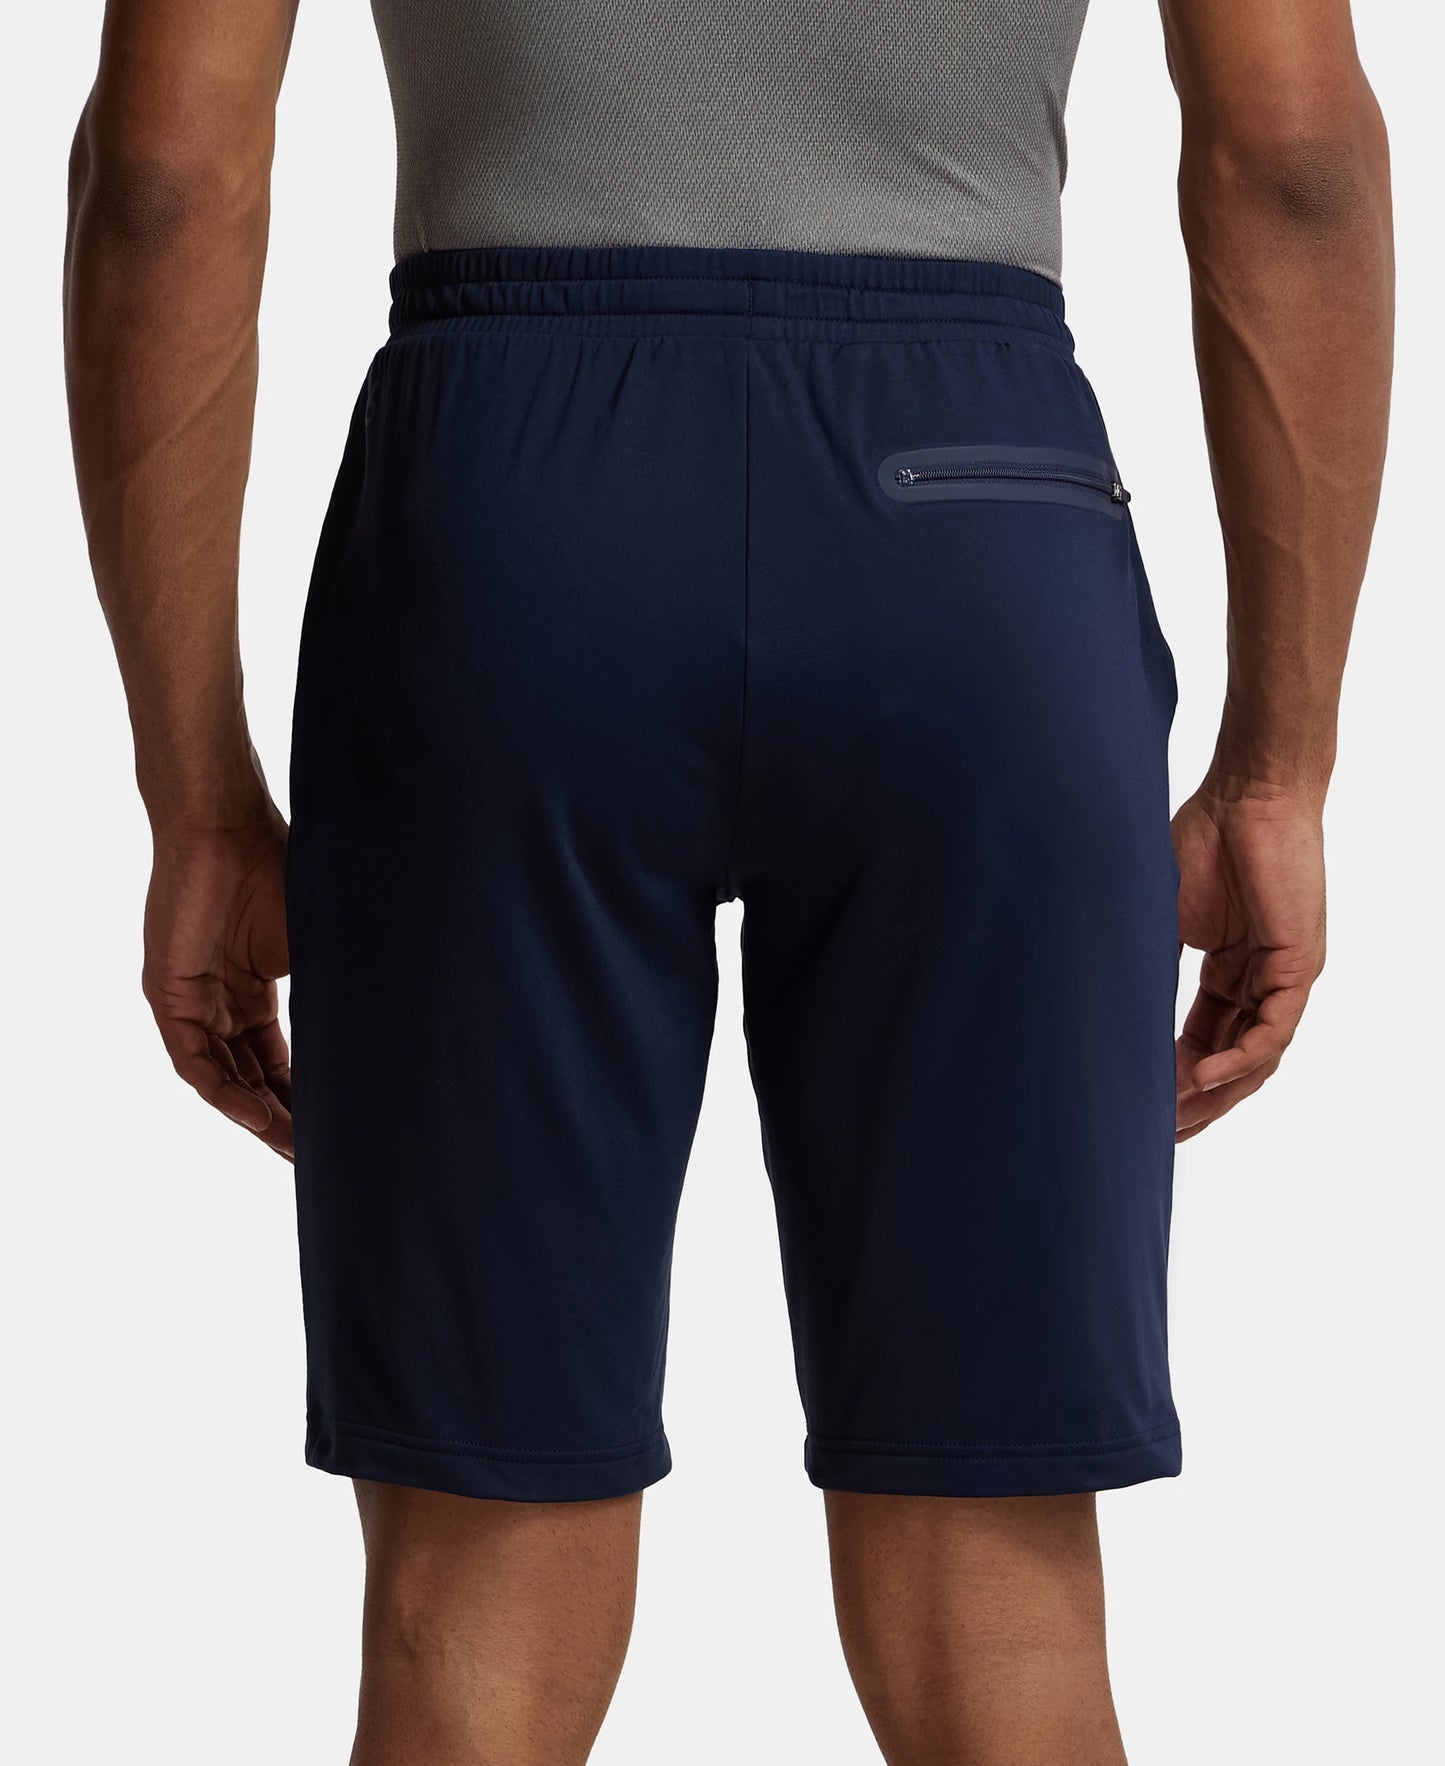 Soft Touch Microfiber Elastane Stretch Shorts with Back Zipper Pocket and StayFresh Treatment - Navy-3